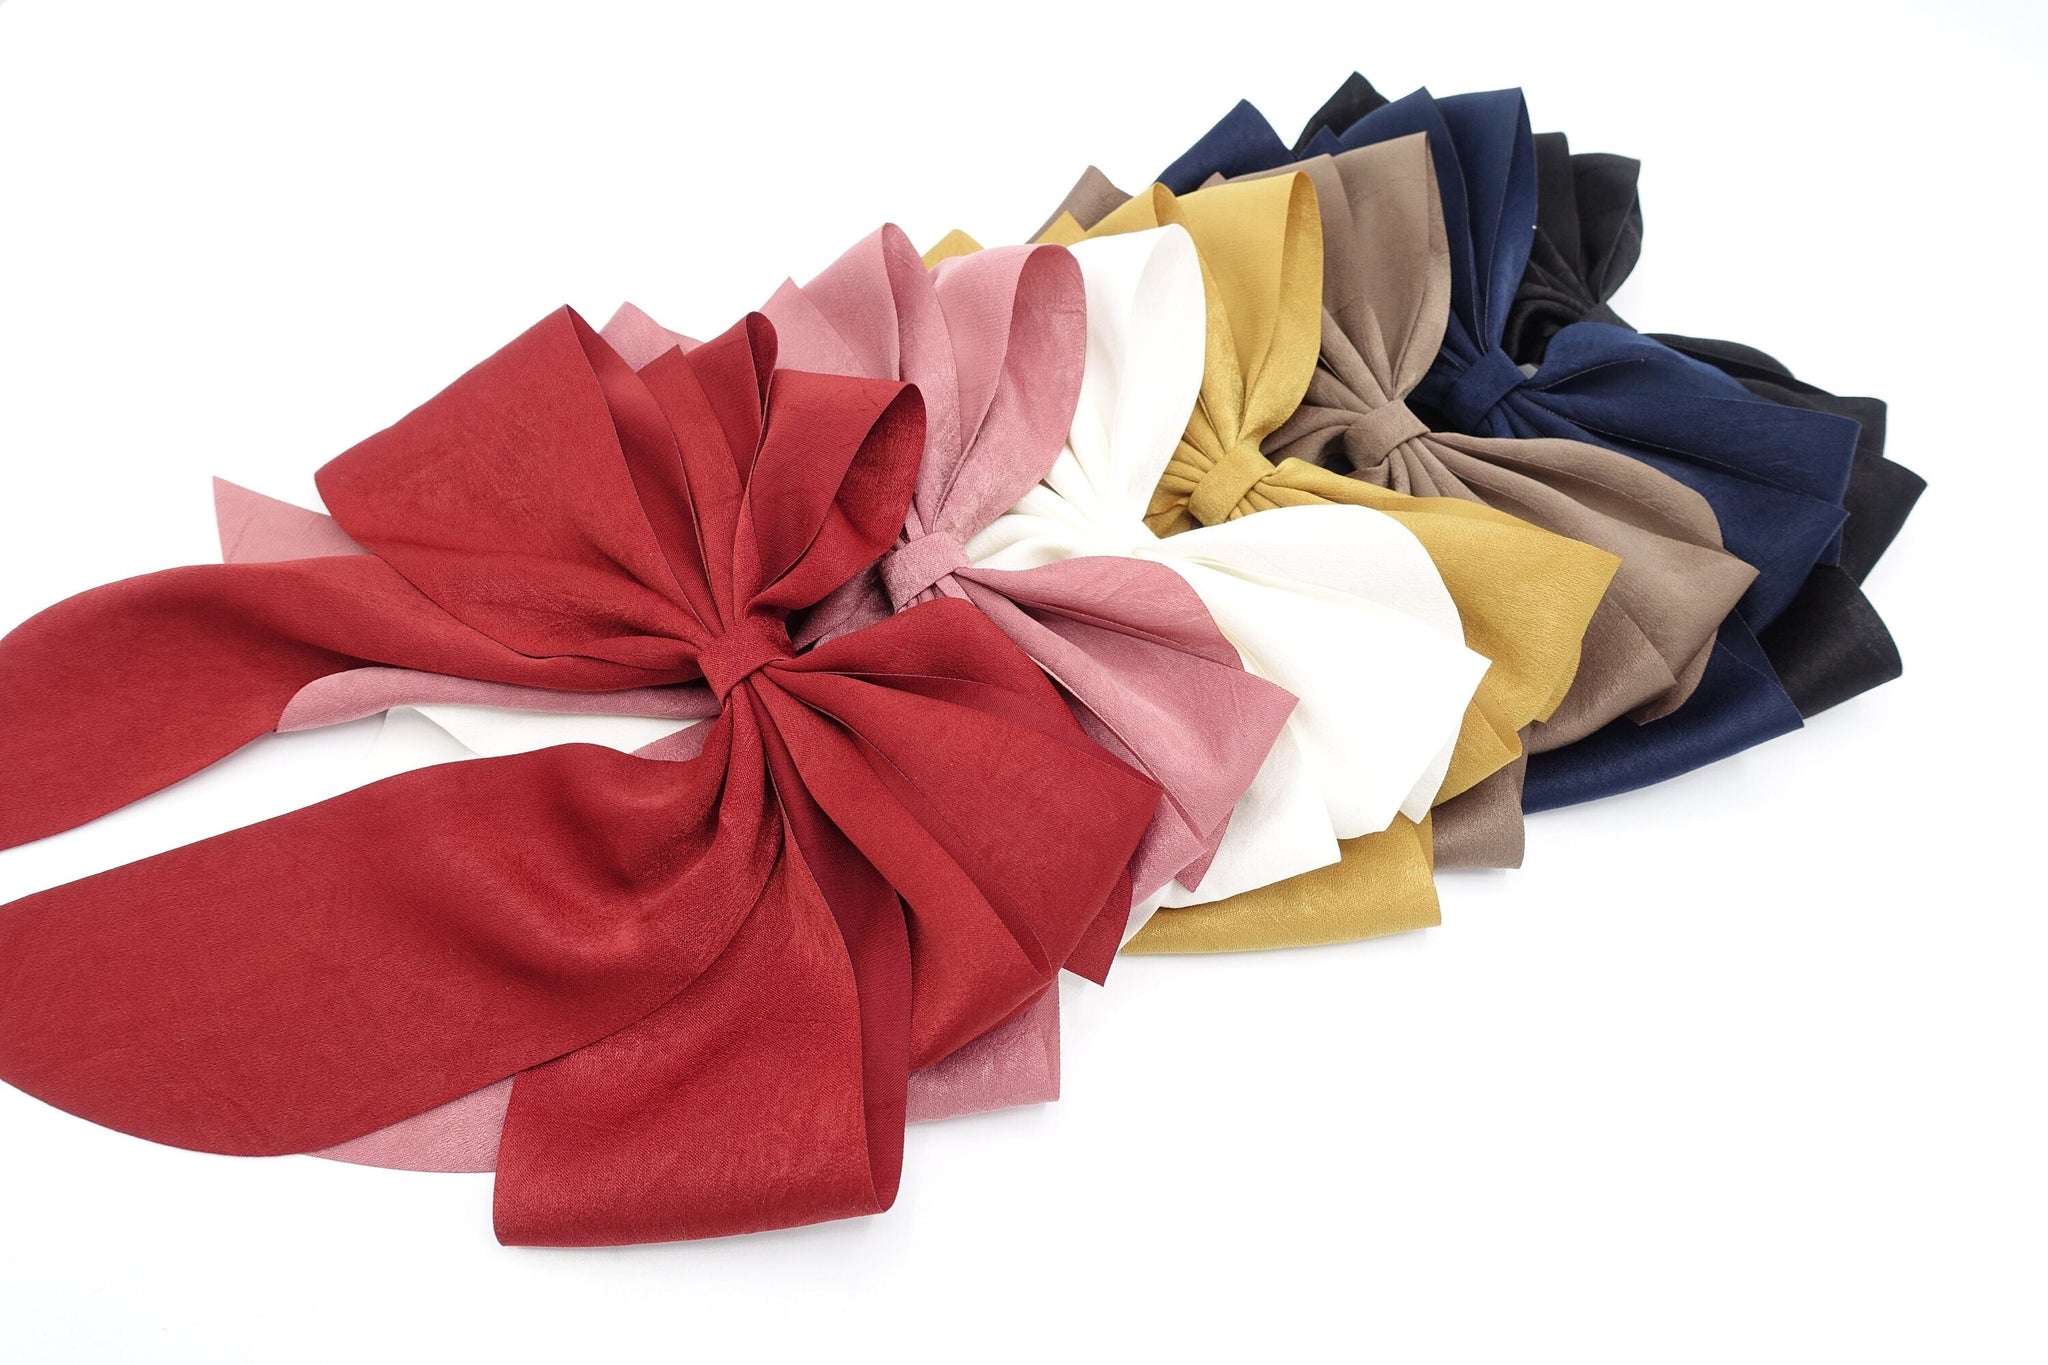 veryshine.com Barrette (Bow) multiple layered tail hair bow crinkled fabric pleated bow hair accessory for women